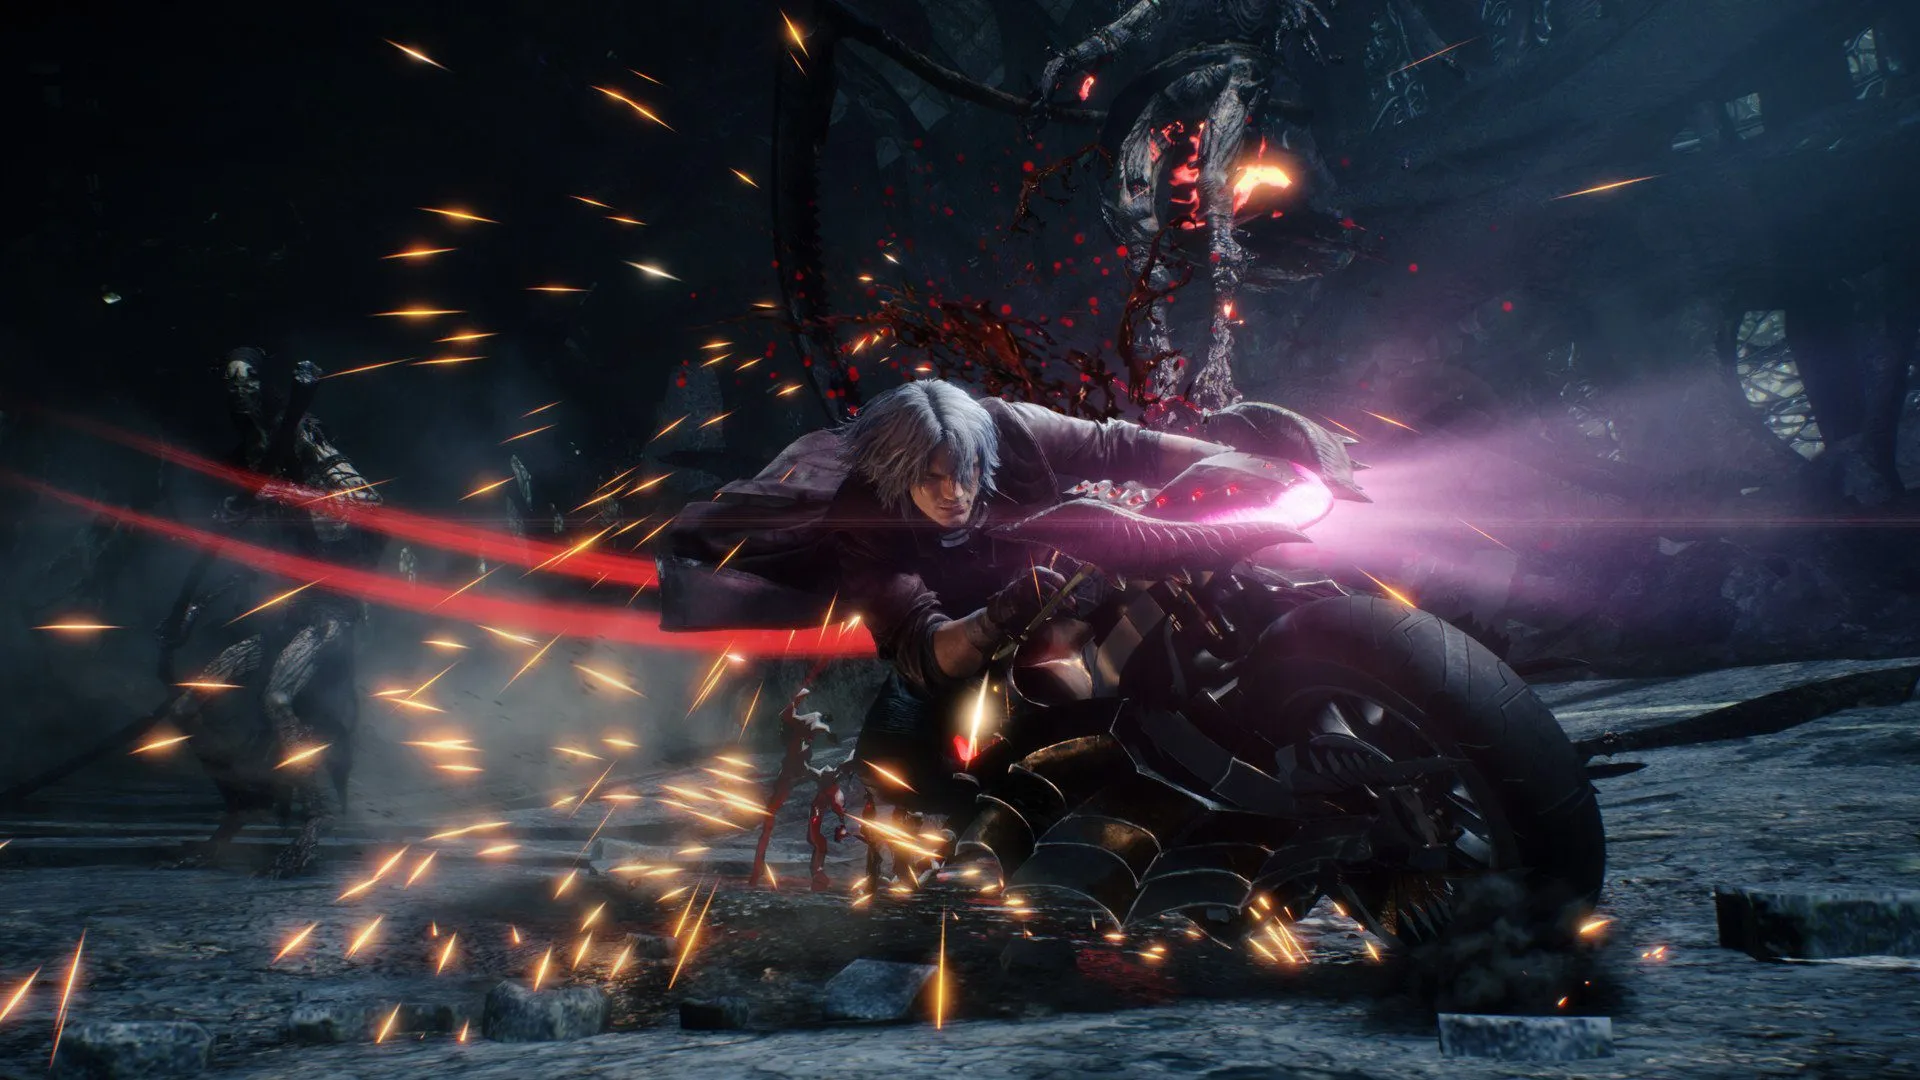 Devil May Cry 5: Special Edition at the best price